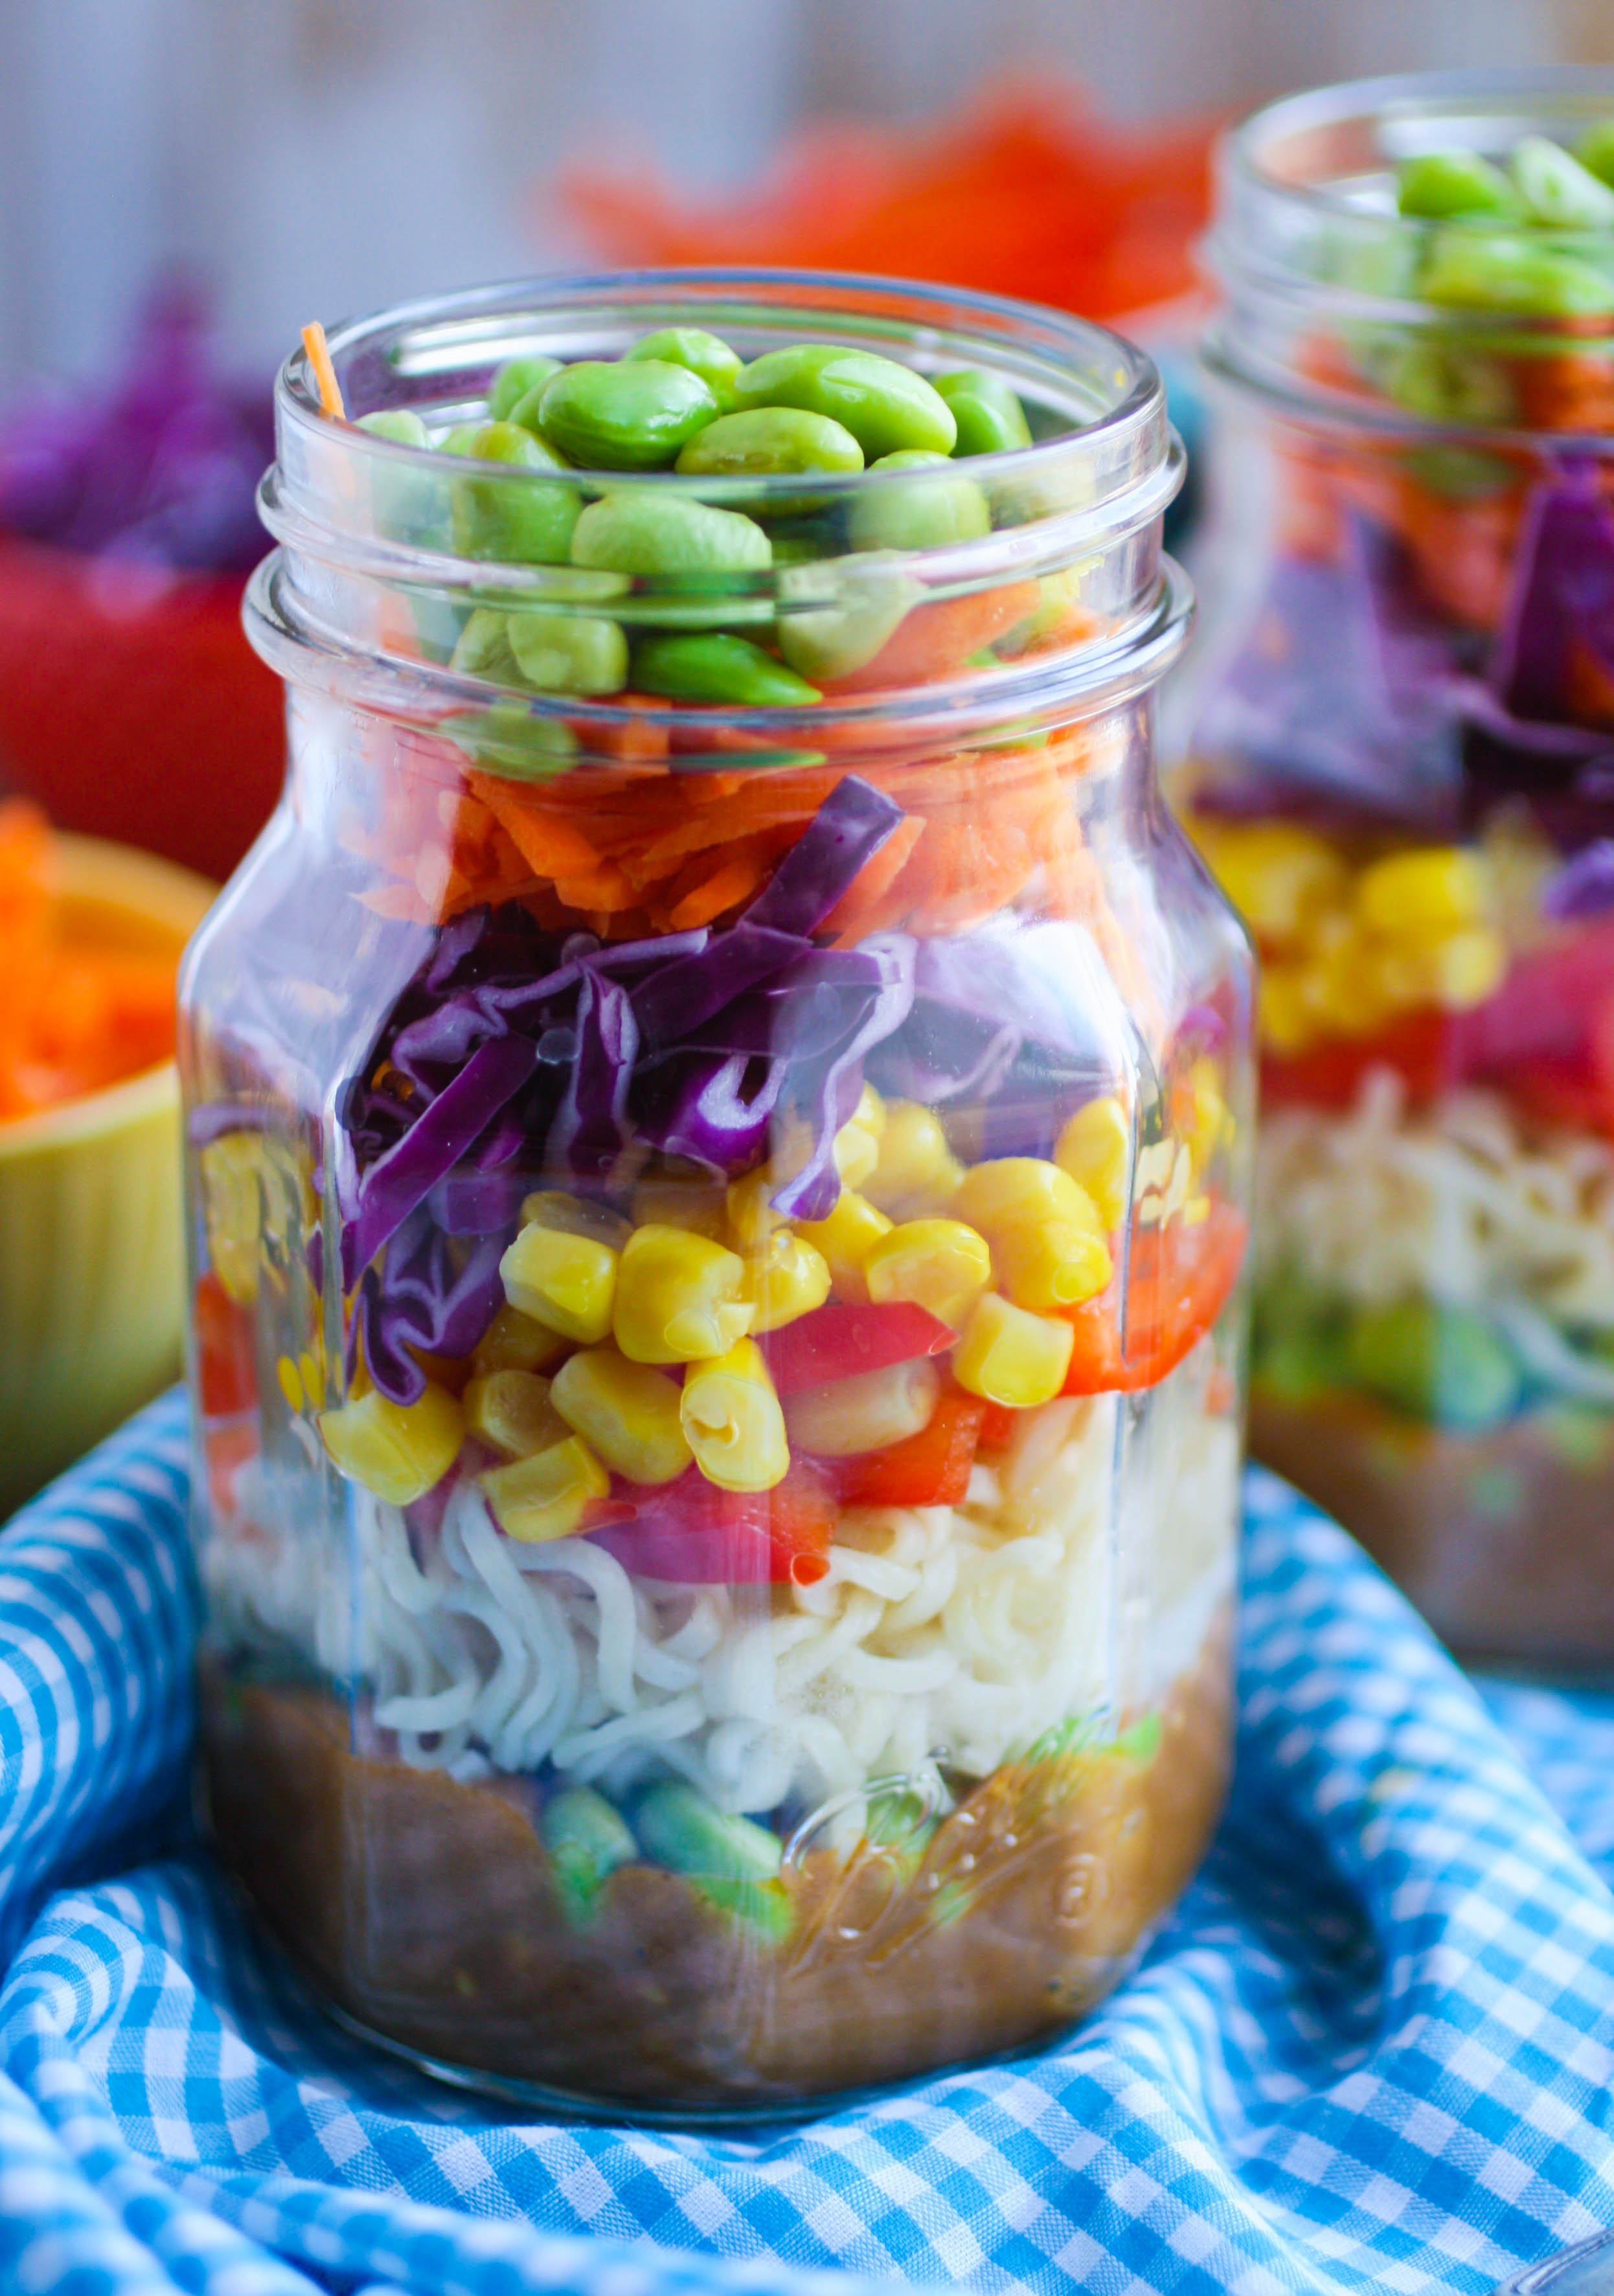 Asian Noodle Salad in a Jar with Spicy Peanut Dressing